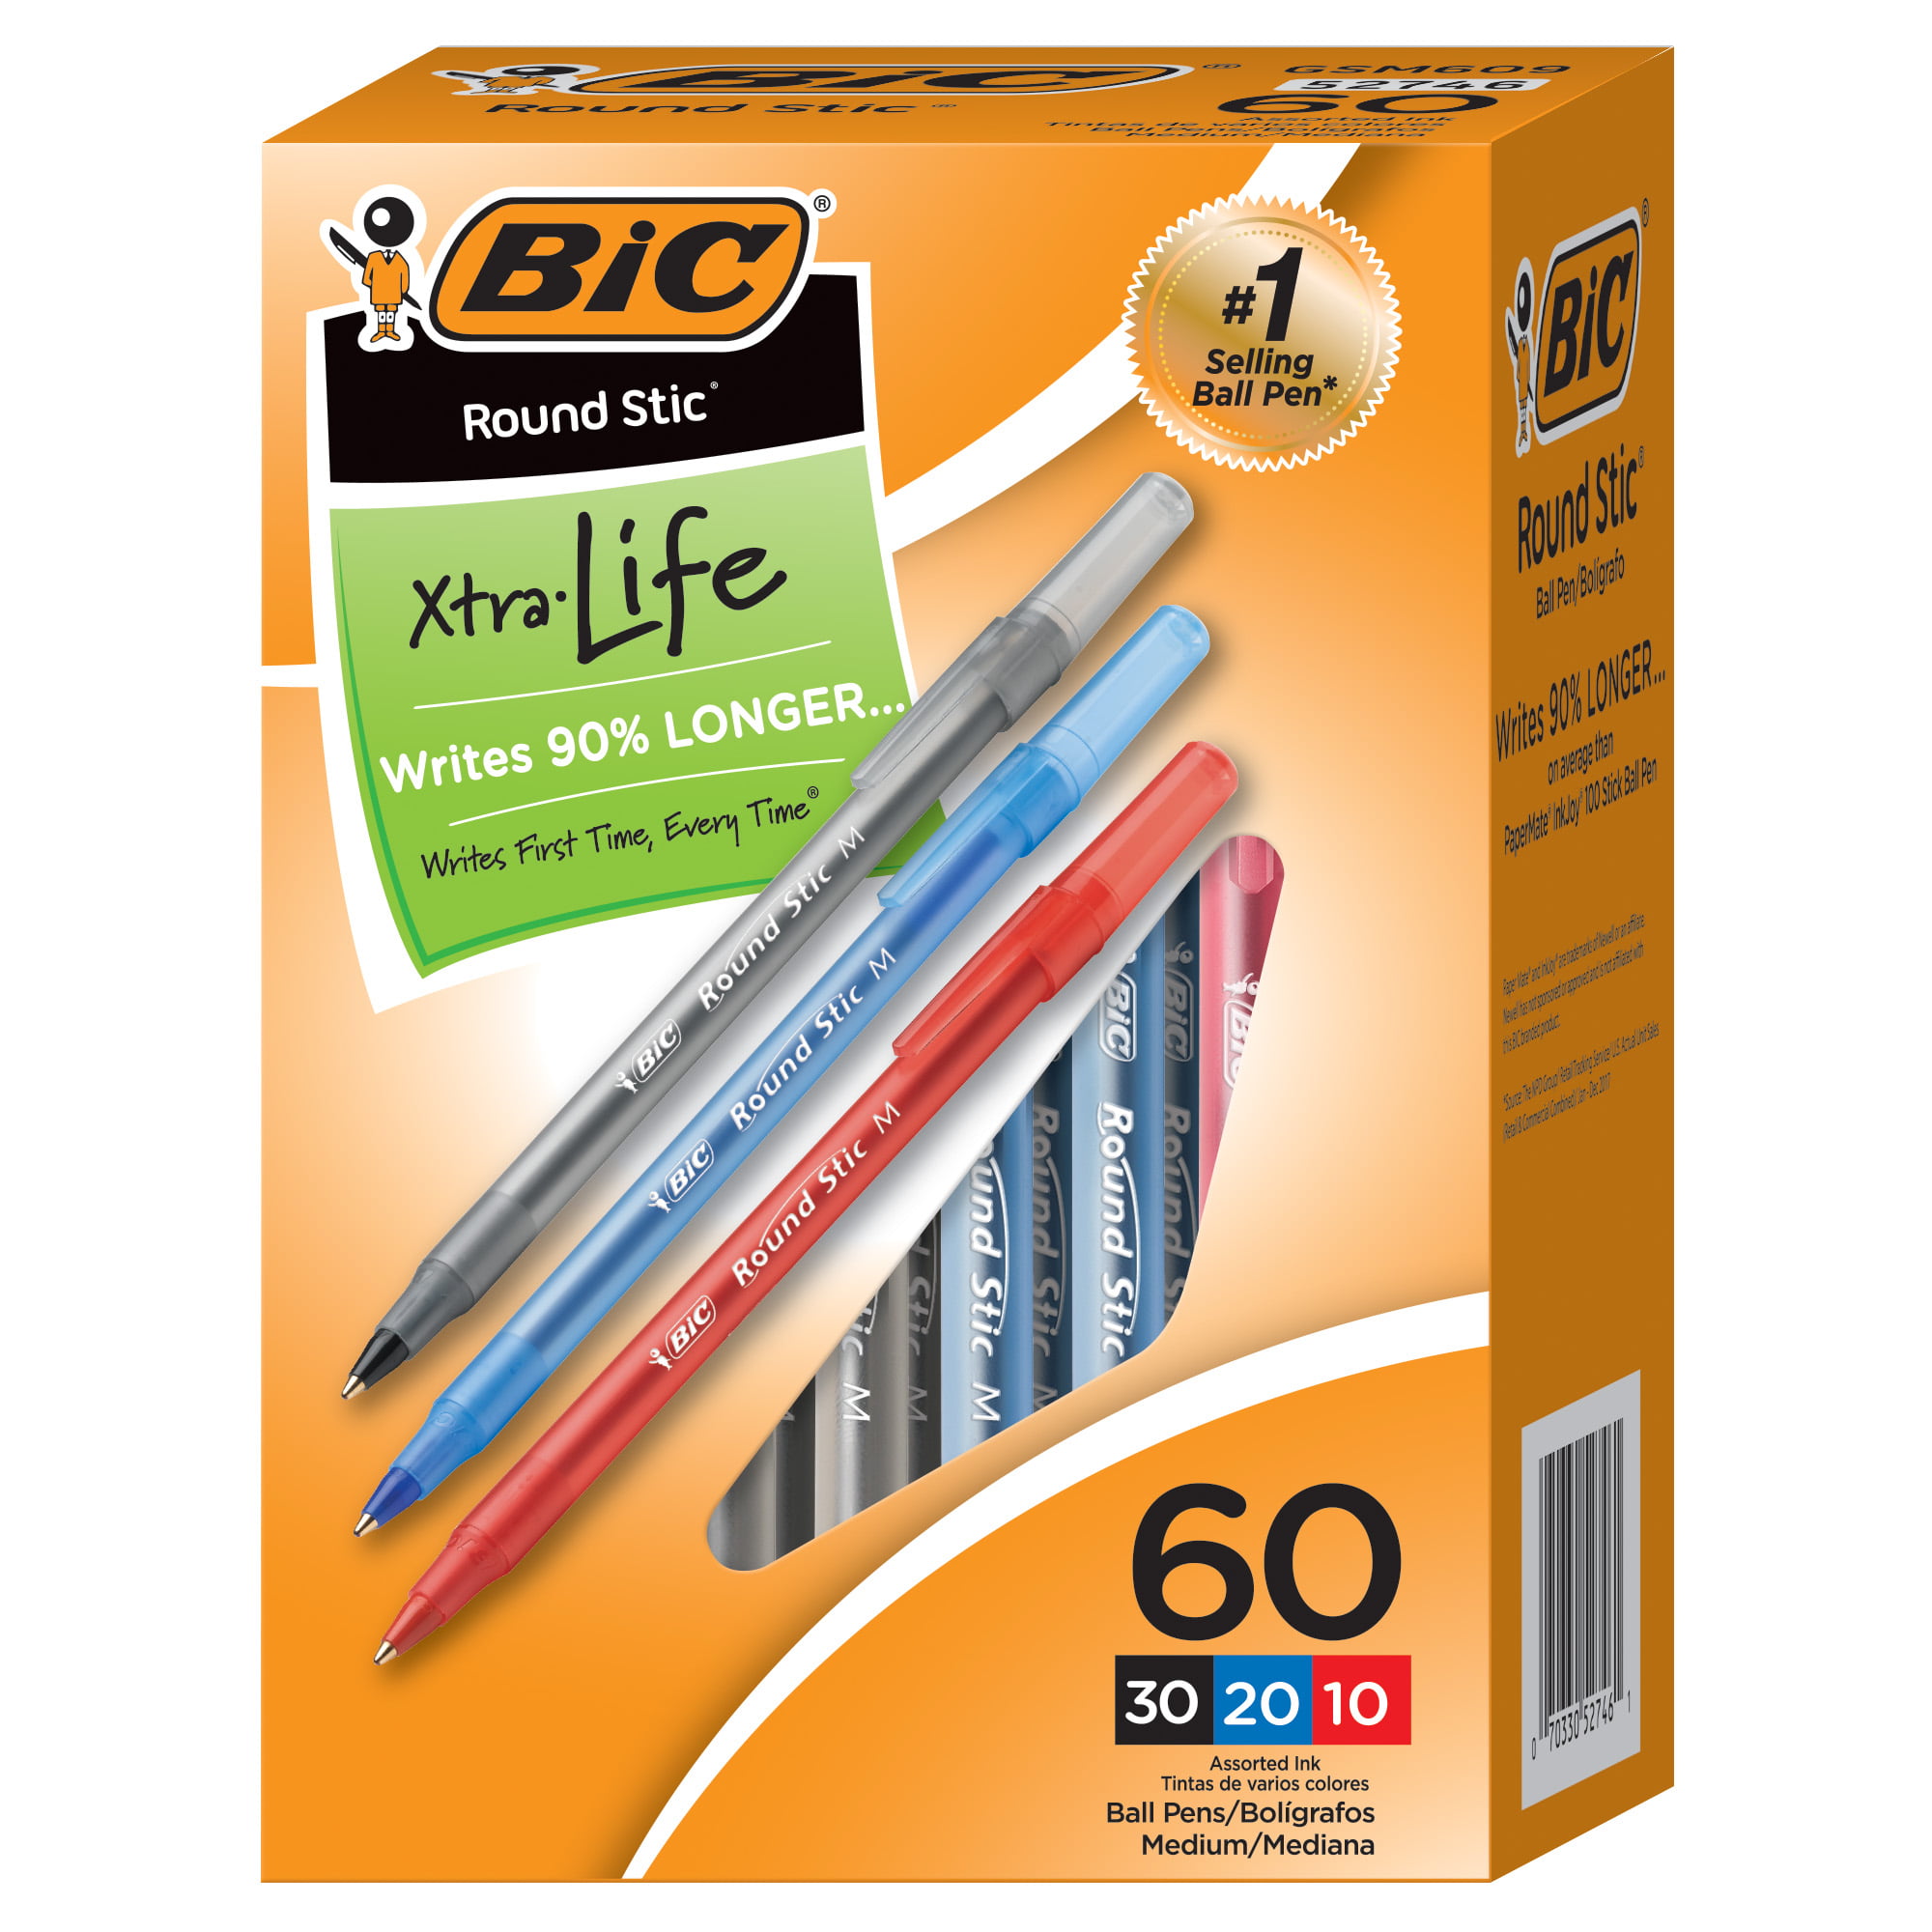 Medium Point Red 1.0mm 10-Count BIC Round Stic Xtra Life Ballpoint Pen 